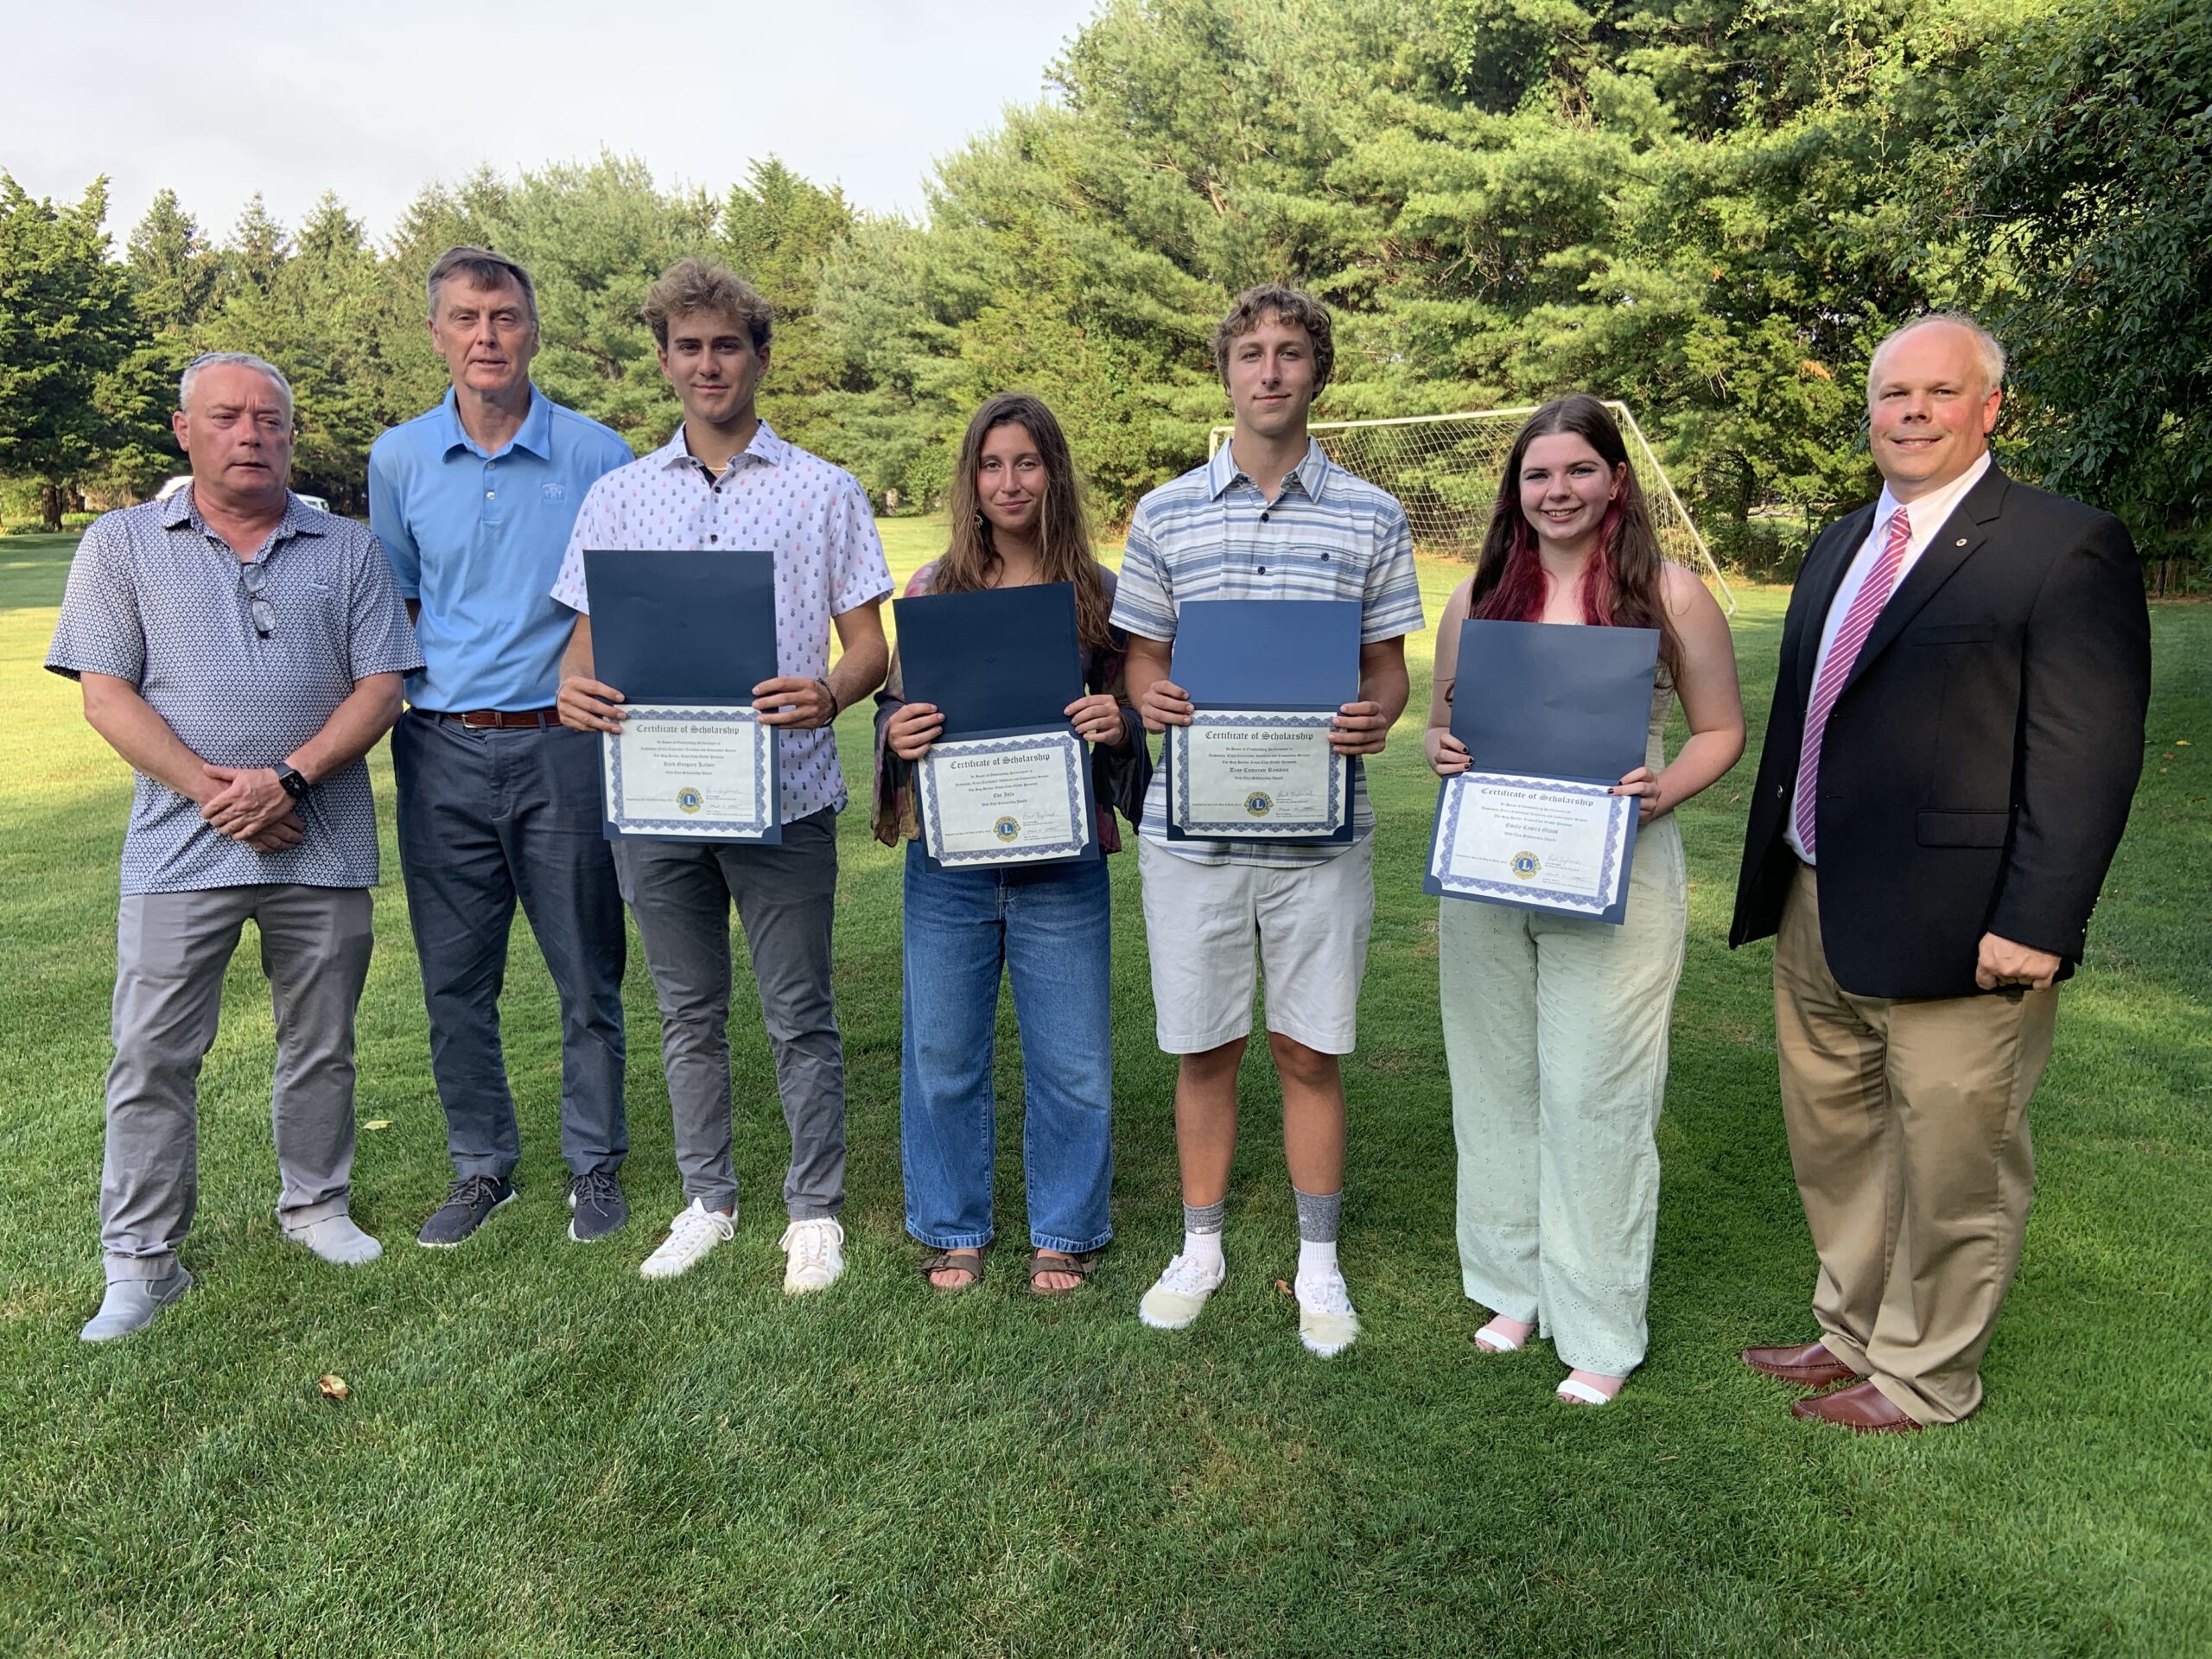 The Sag Harbor Lions Club recently presented scholarships totaling $41,500 to four Pierson High School graduates. From left, Tony Lawless and Paul Zaykowski, Lions Club co-presidents, Reed Kelsey, Eve Iulo, Troy Remkus, Emily Glass, and Lions Club selection committee member Mark Poitras. STEPHEN J. KOTZ